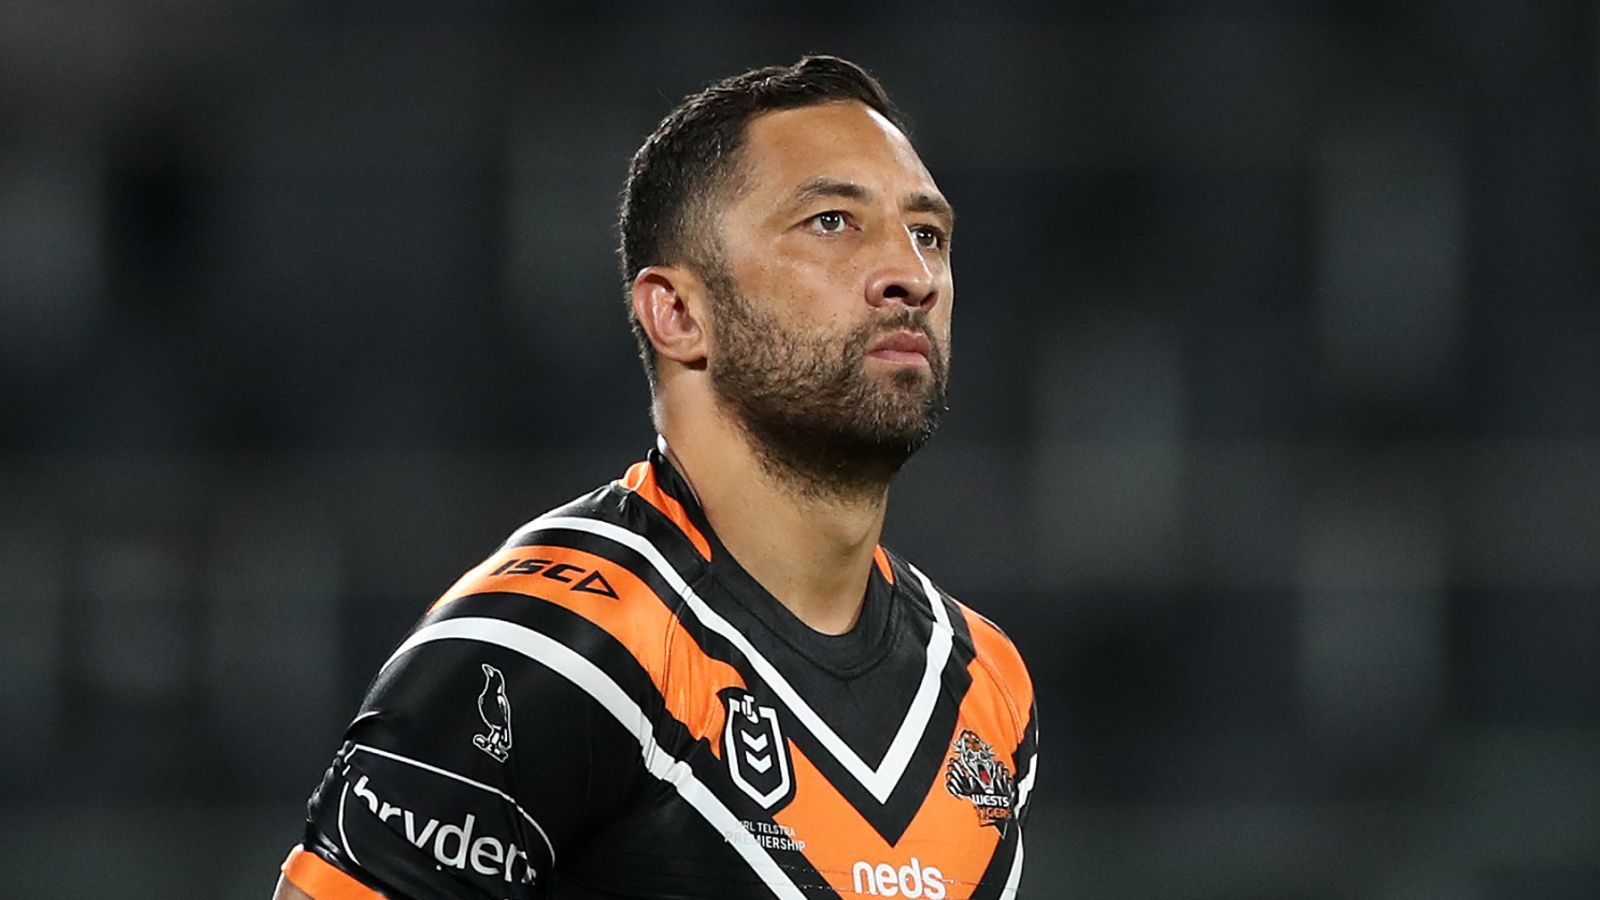 Coronavirus: Wests Tigers star Marshall breaches protocol with reporter